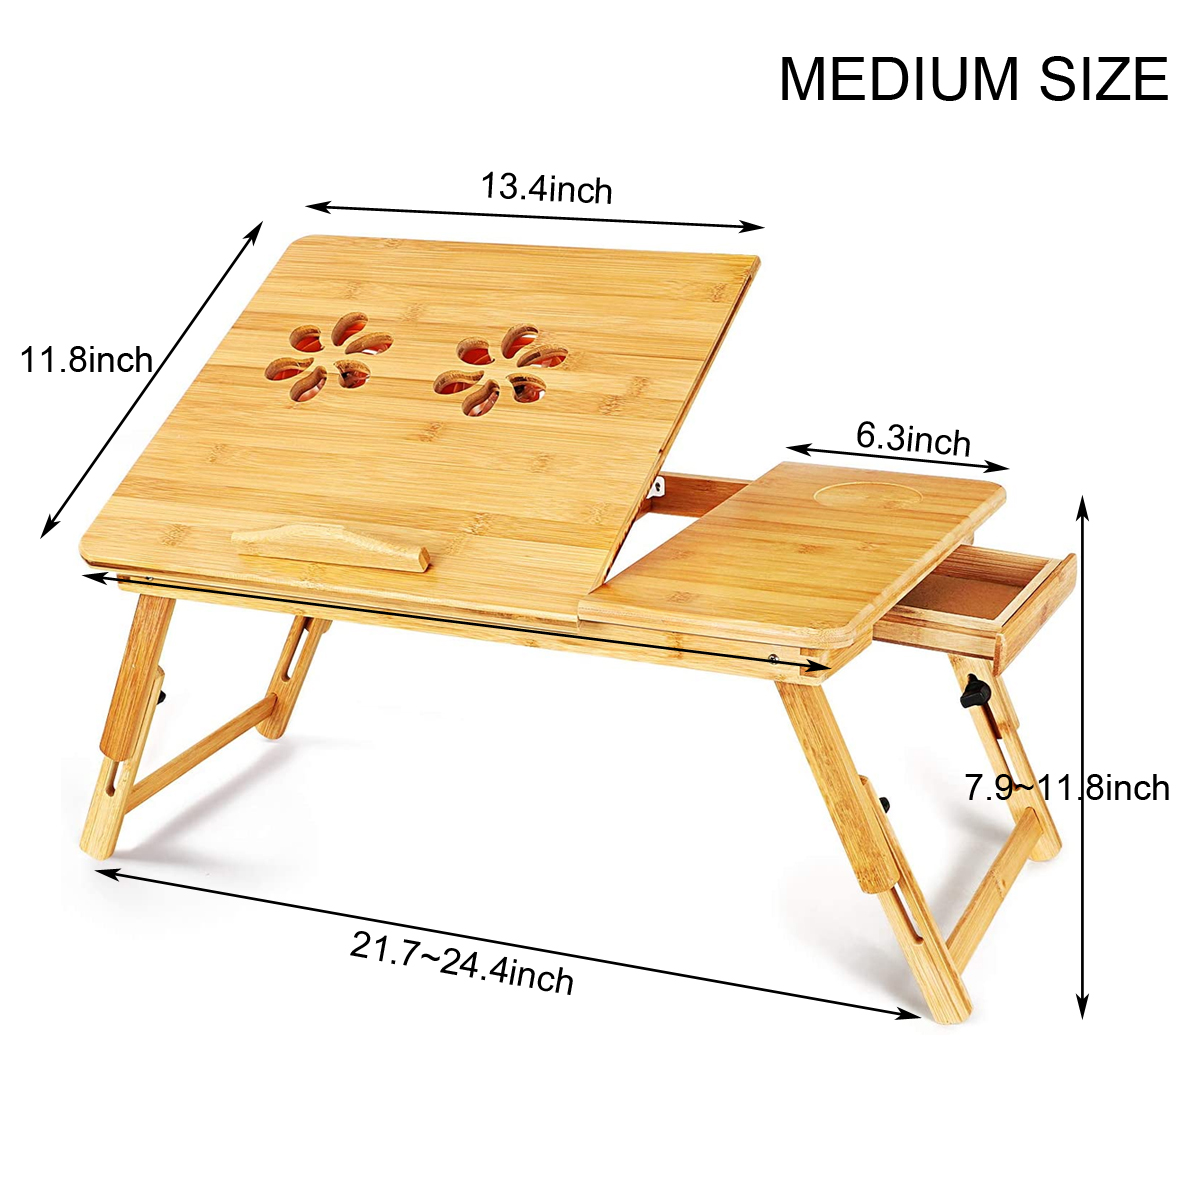 Bamboo Laptop Desk Stand Lap Desk Table Flower Pattern Foldable Breakfast Serving Bed Tray with Storage Drawer with Adjustable Leg